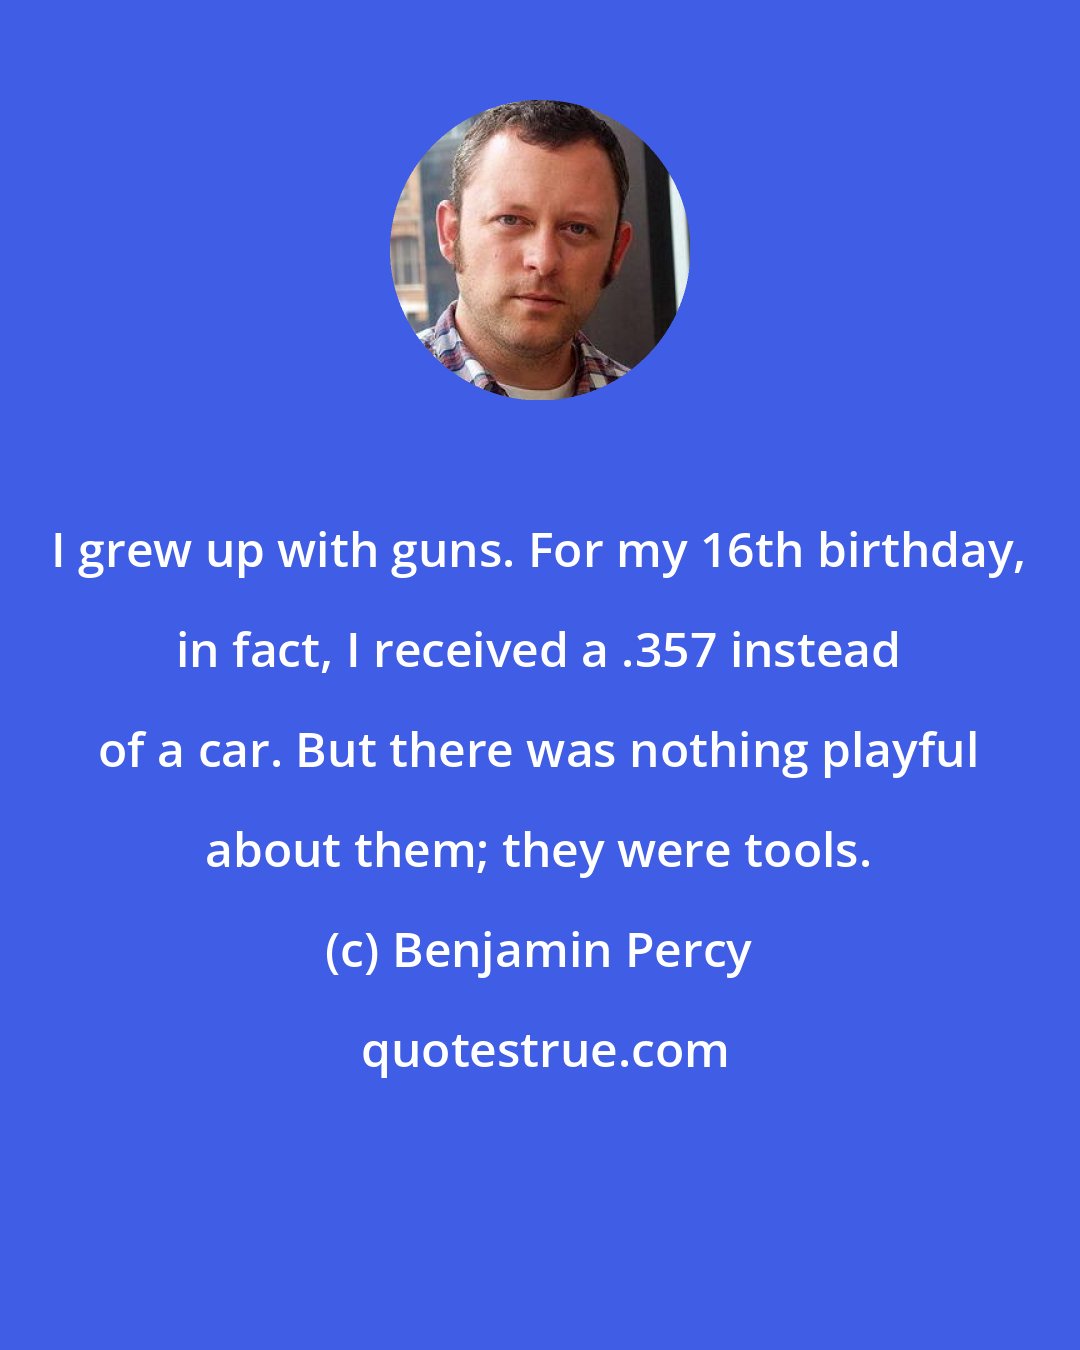 Benjamin Percy: I grew up with guns. For my 16th birthday, in fact, I received a .357 instead of a car. But there was nothing playful about them; they were tools.